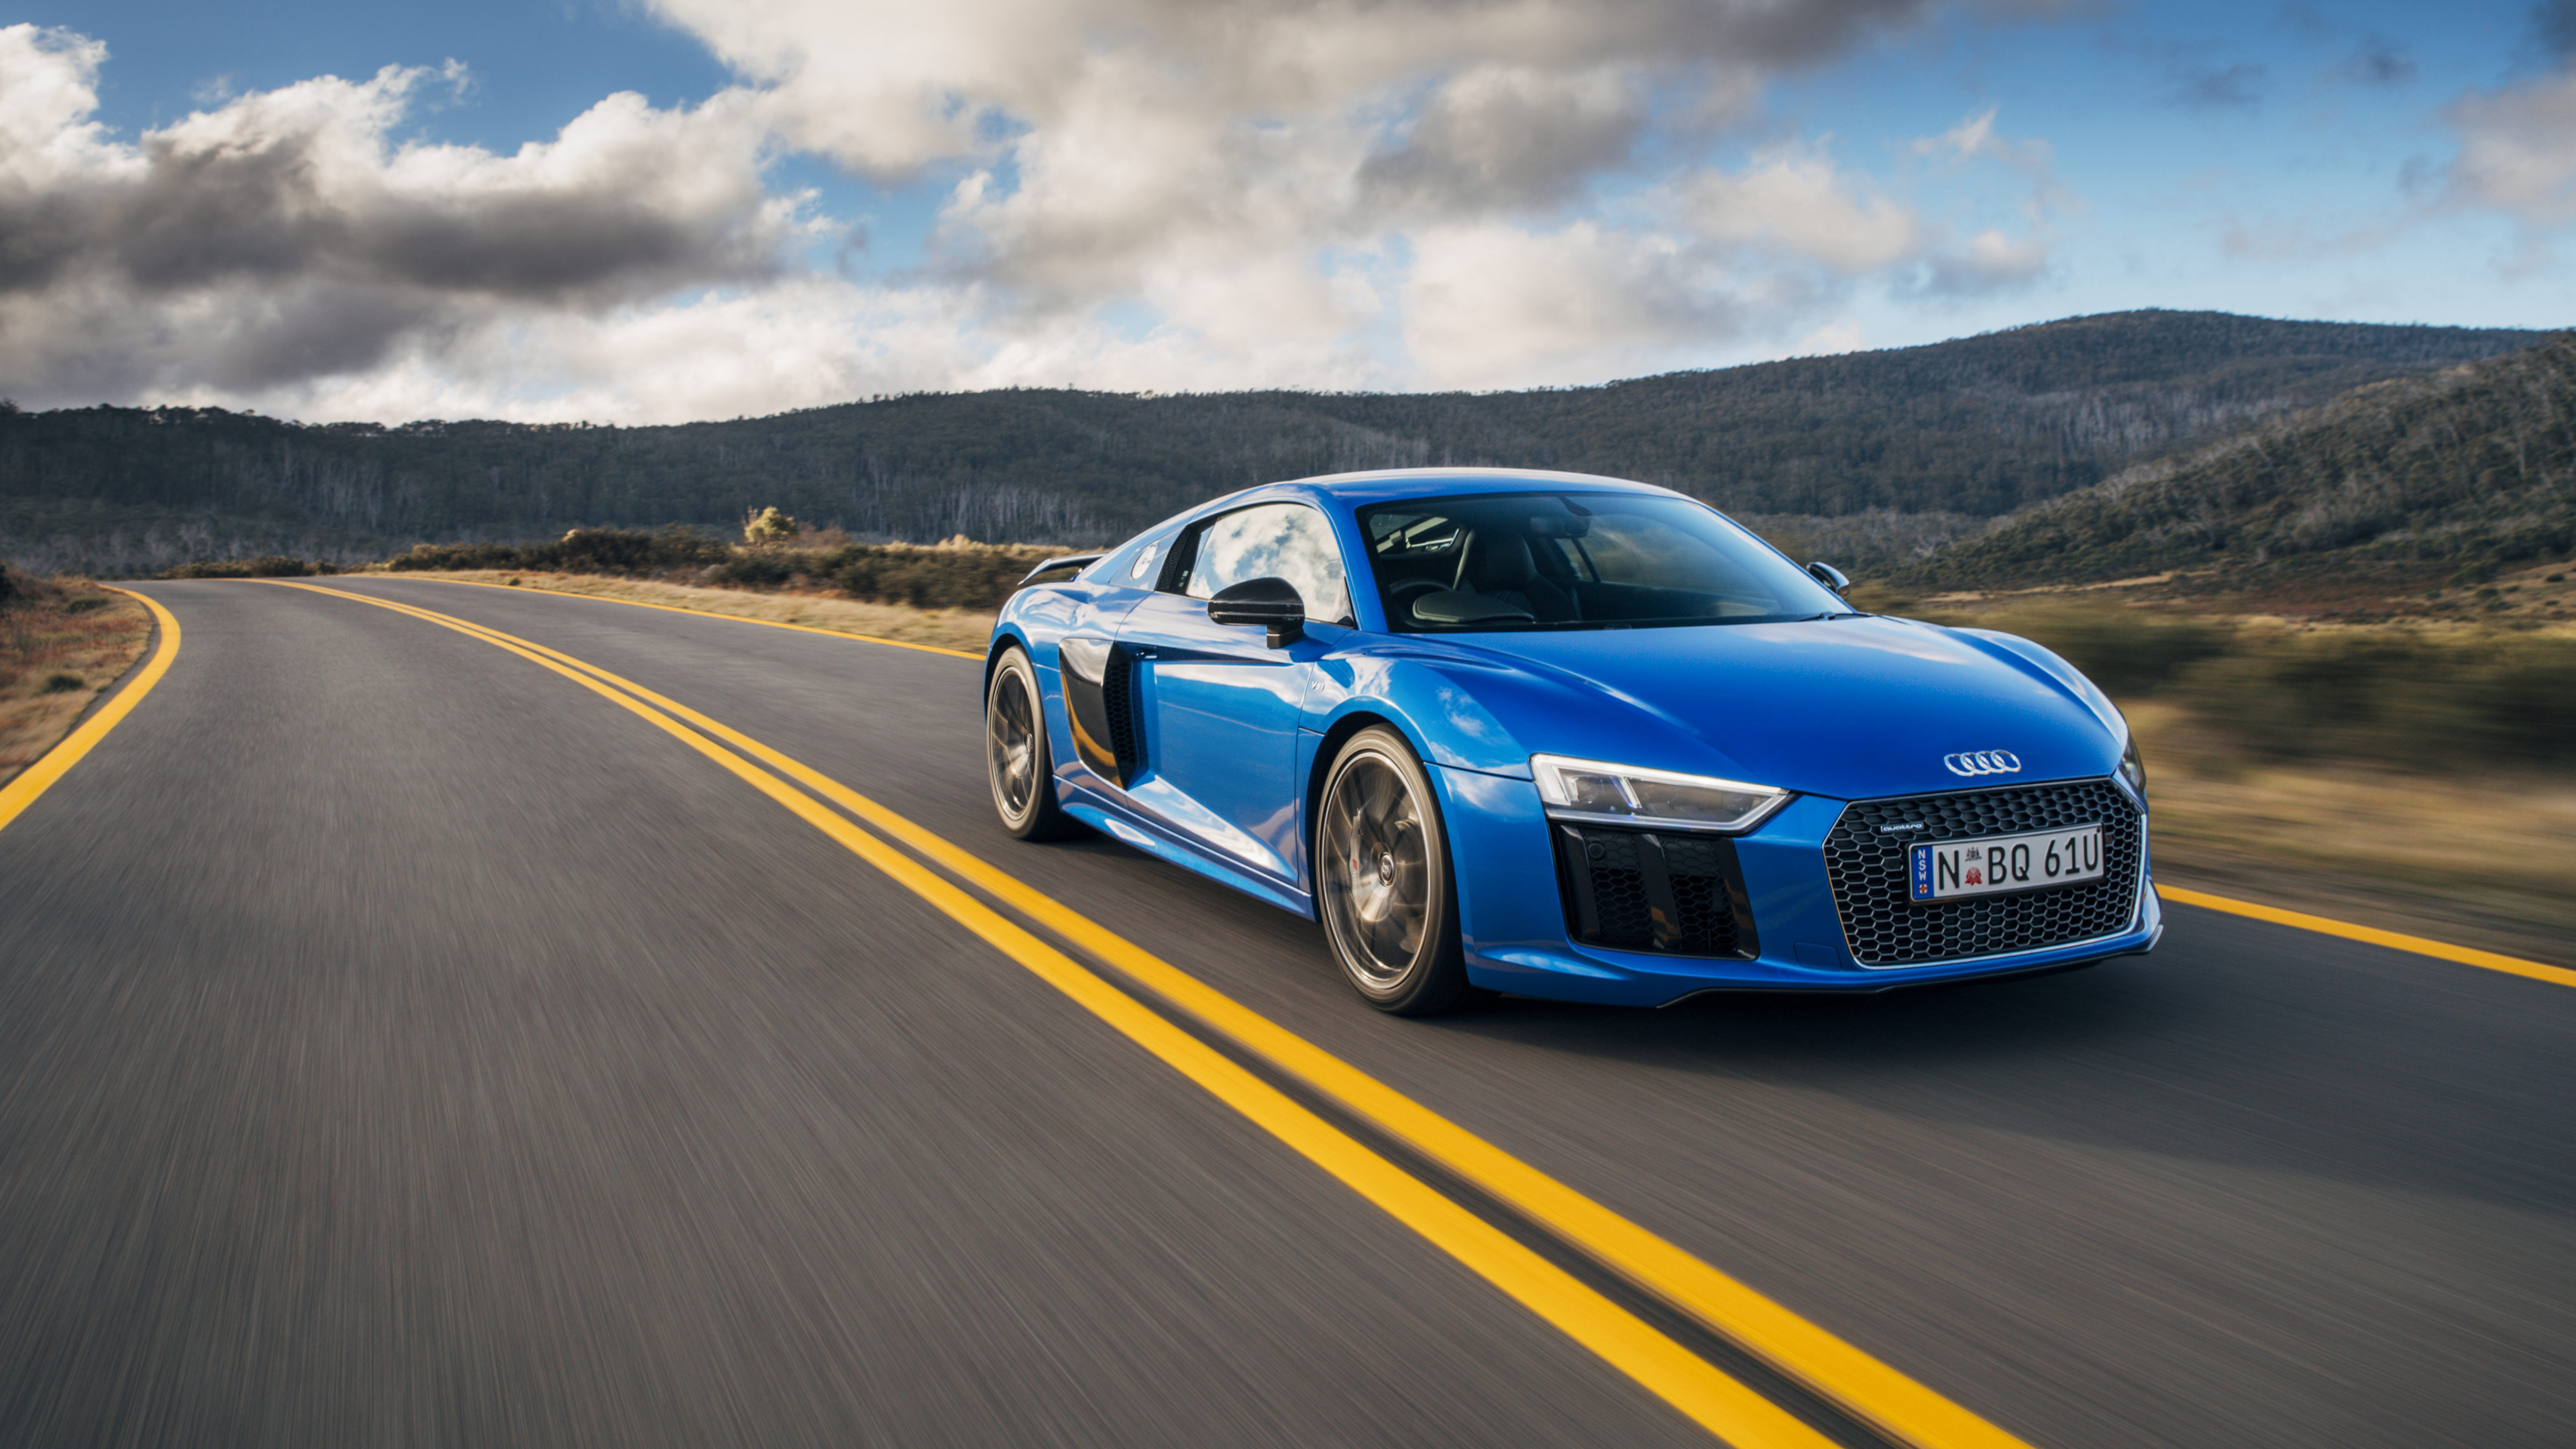 Blue Audi Coupe on Road During Daytime. Wallpaper in 3840x2160 Resolution